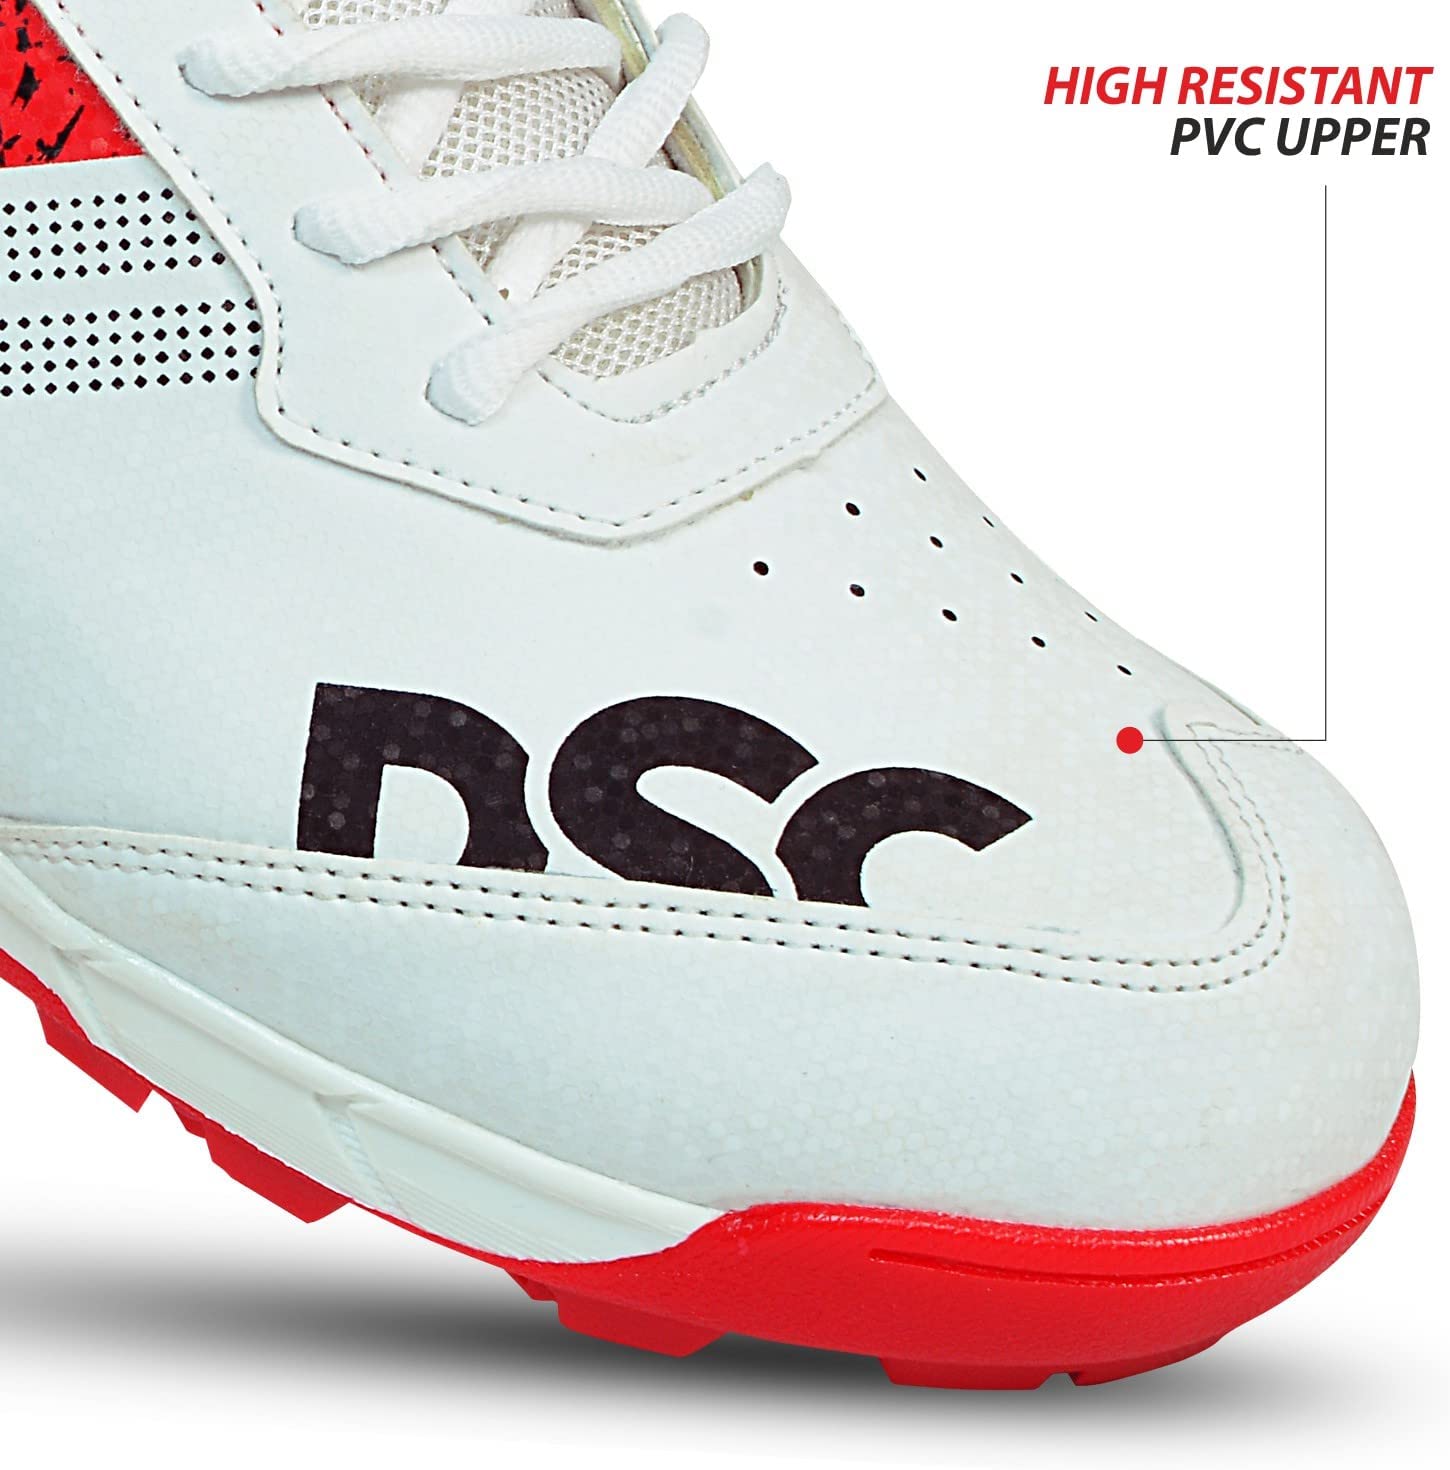 DSC Zooter Cricket Shoes (White-Red)